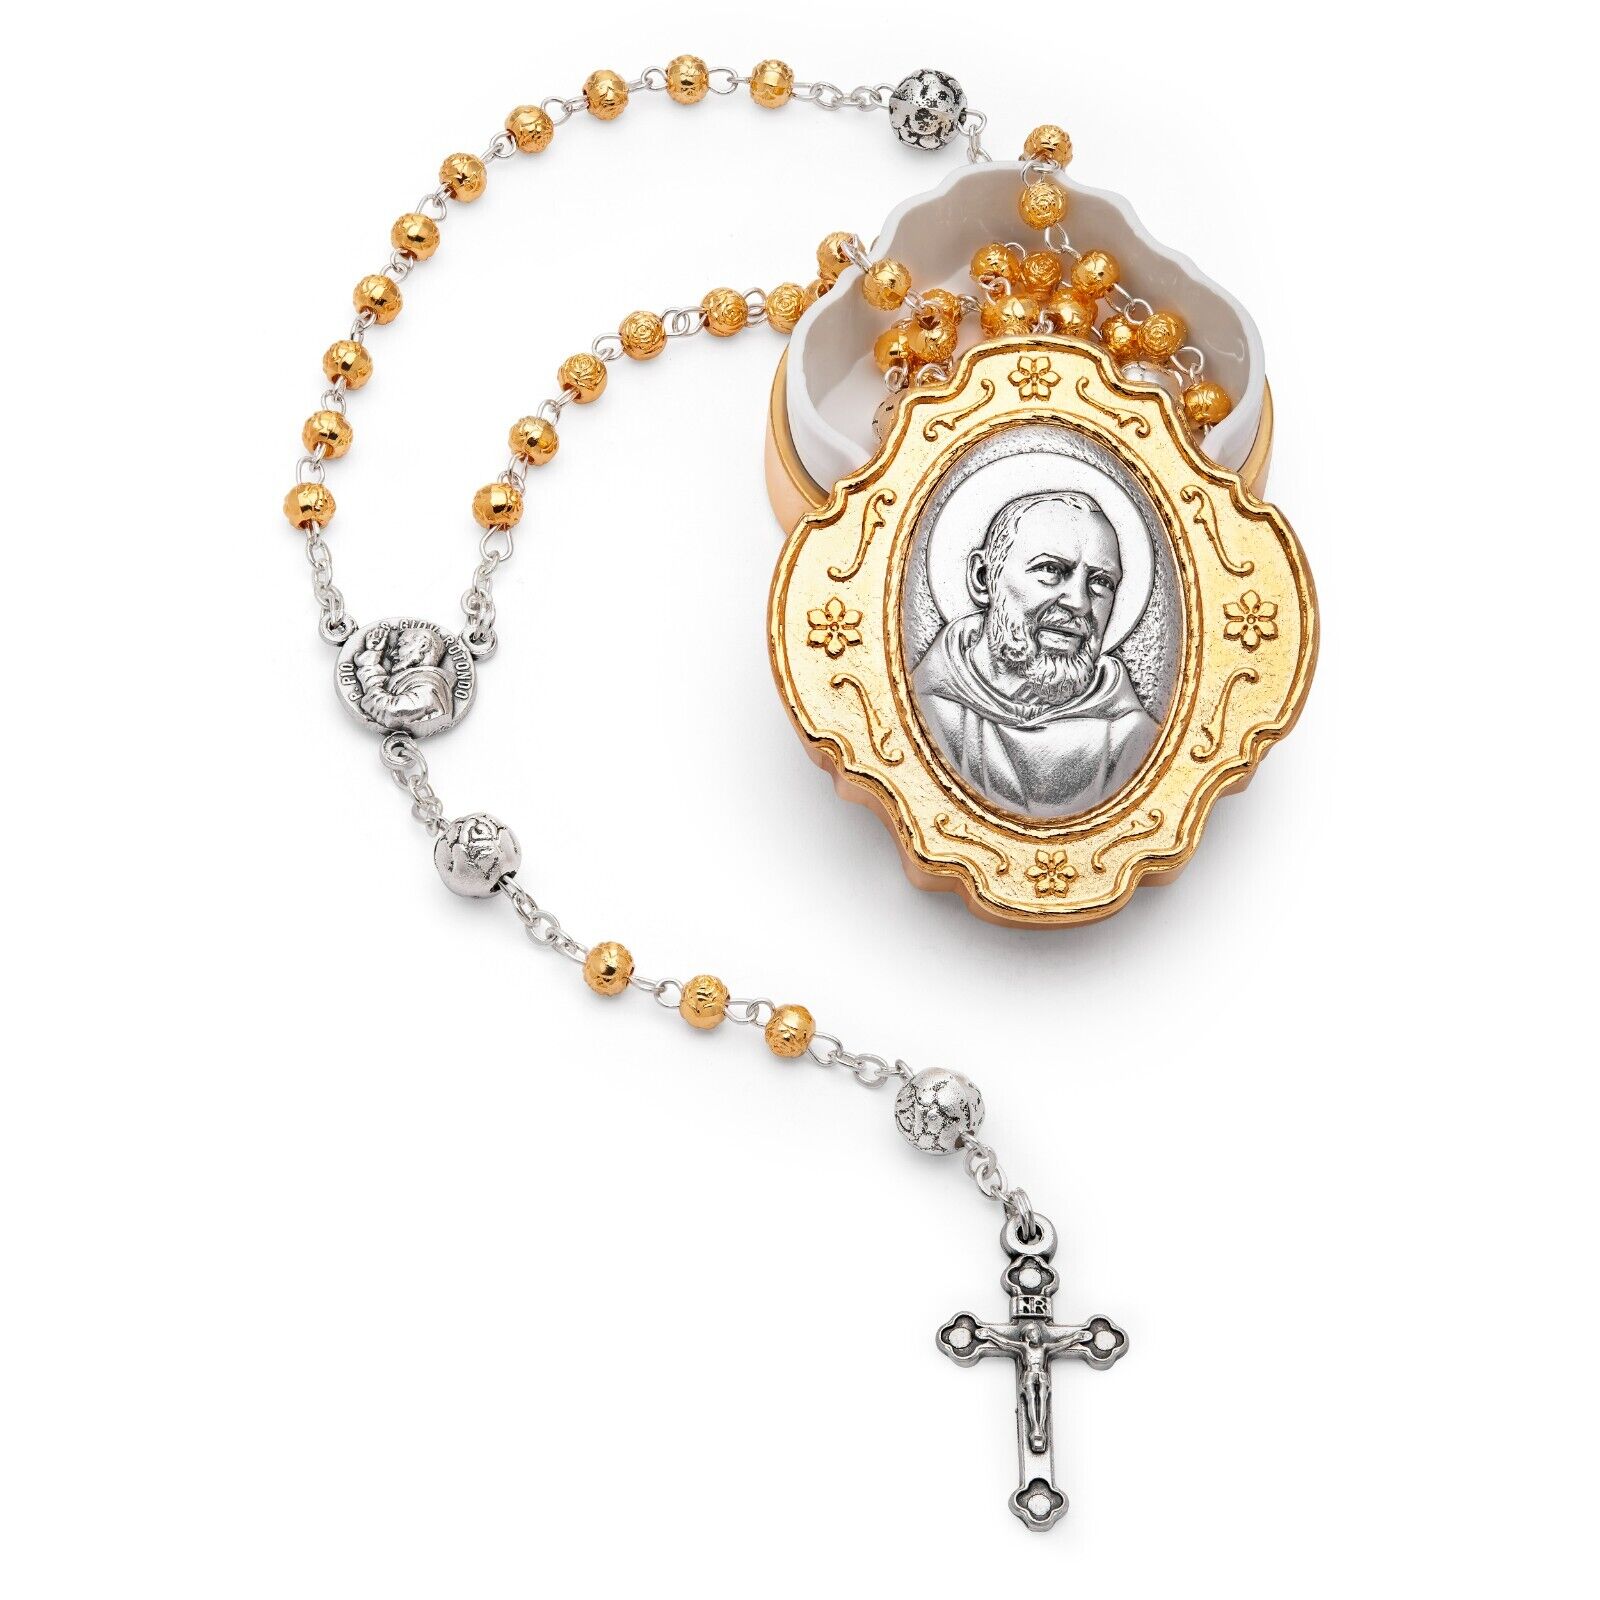 Saint St Padre Pio Rosary Beads Catholic Prayer Necklace Blessed By Pope Francis